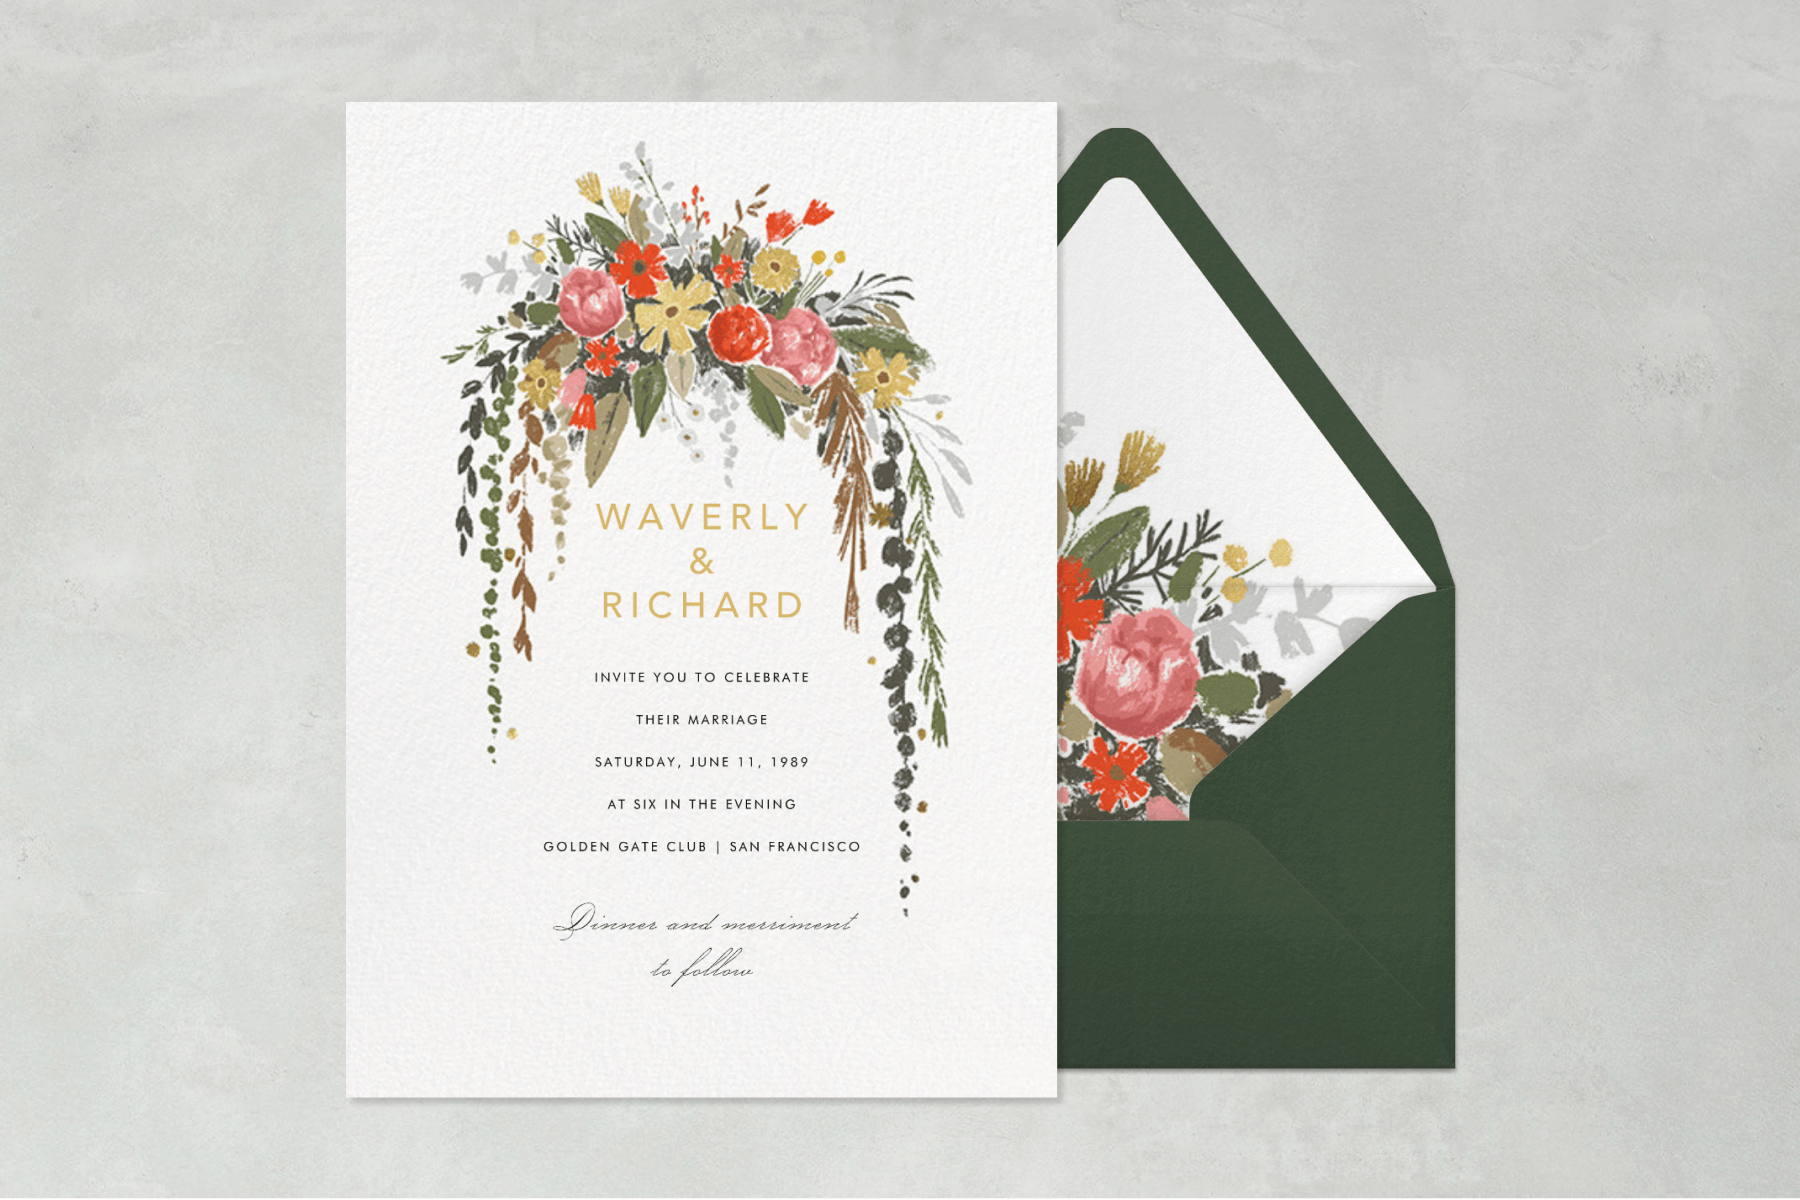 Wedding invitation featuring a floral watercolor illustration with pink and red flowers, paired with a dark green envelope with a floral liner.